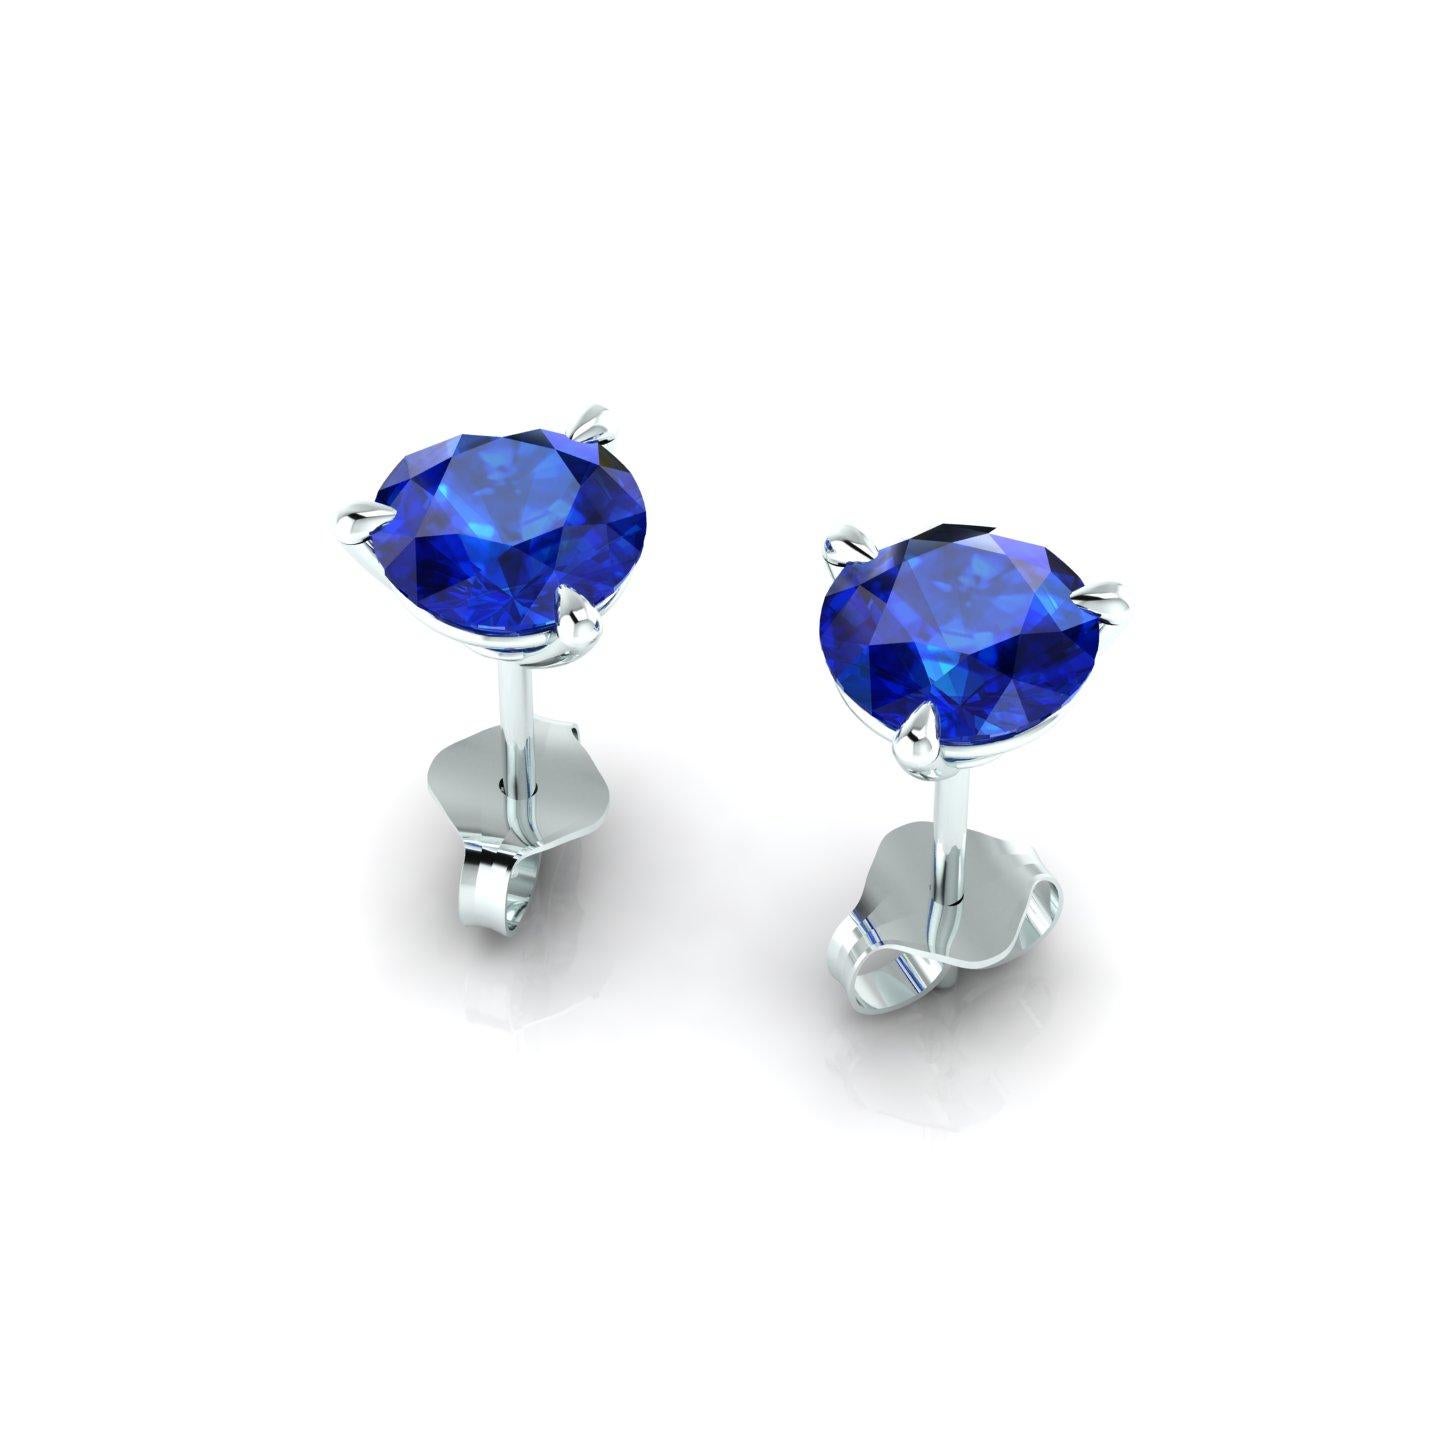 2.4 Carat Blue Sapphires Martini Ear Studs in Platinum, made in New York City with the best Italian craftsmanship,
Perfect gift for any woman and every age, easy to wear from the office to a special evening out.

Every FERRUCCI jewelry creation is